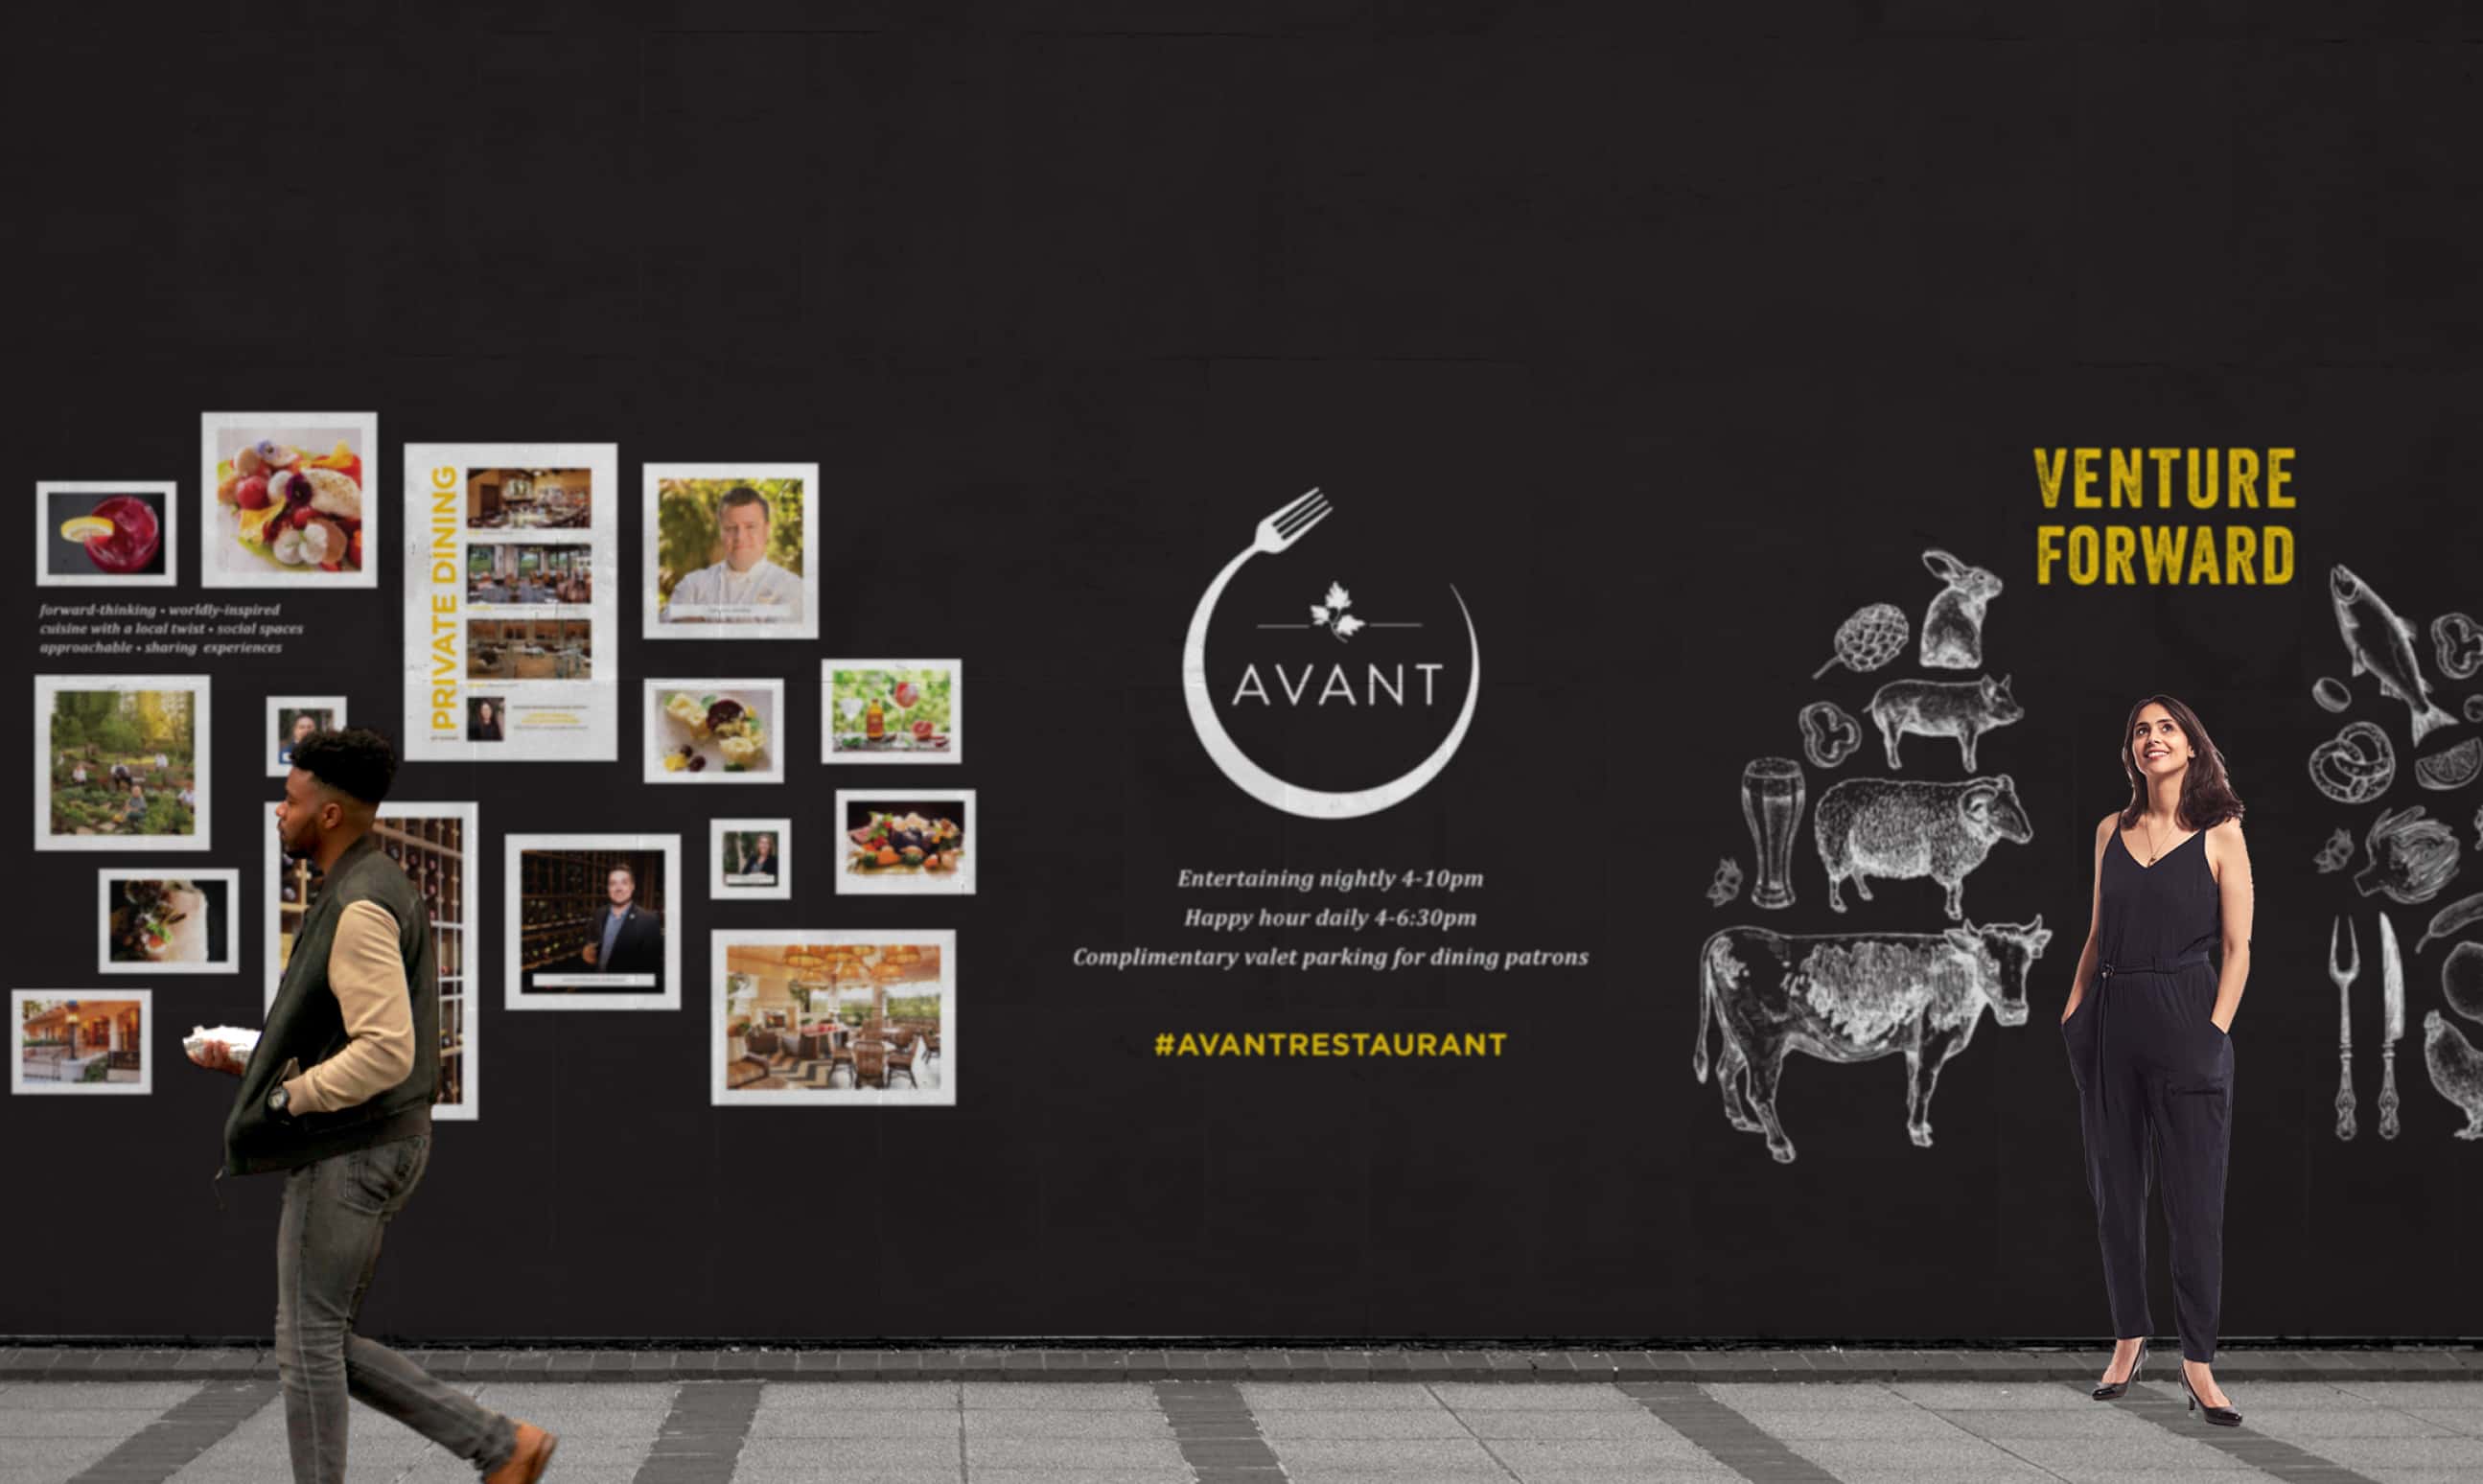 A mural on a wall featuring the AVANT logo and various food and animal illustrations with text 'VENTURE FORWARD' and a tagline 'Entertaining nightly, happy hour details, and complimentary valet parking,' with a woman and a man walking past.